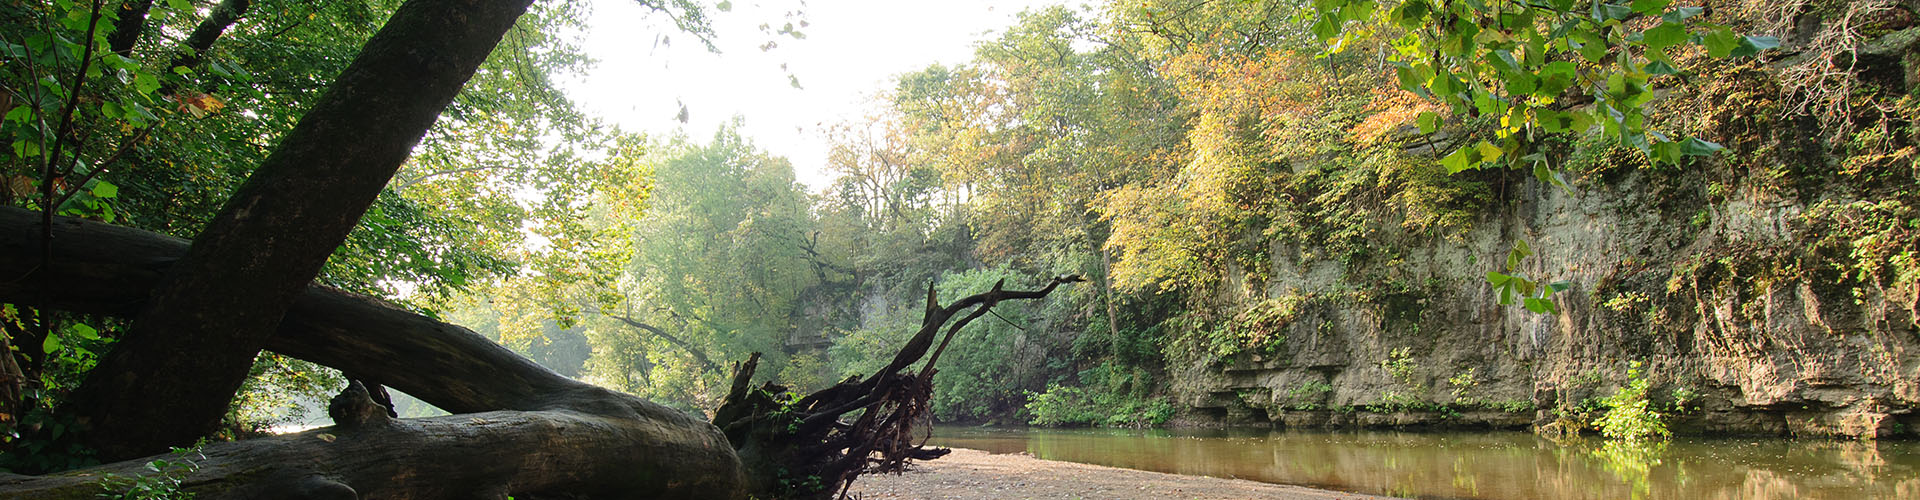 A fallen tree on the bank of Coonville Creek in St. Francois State Park